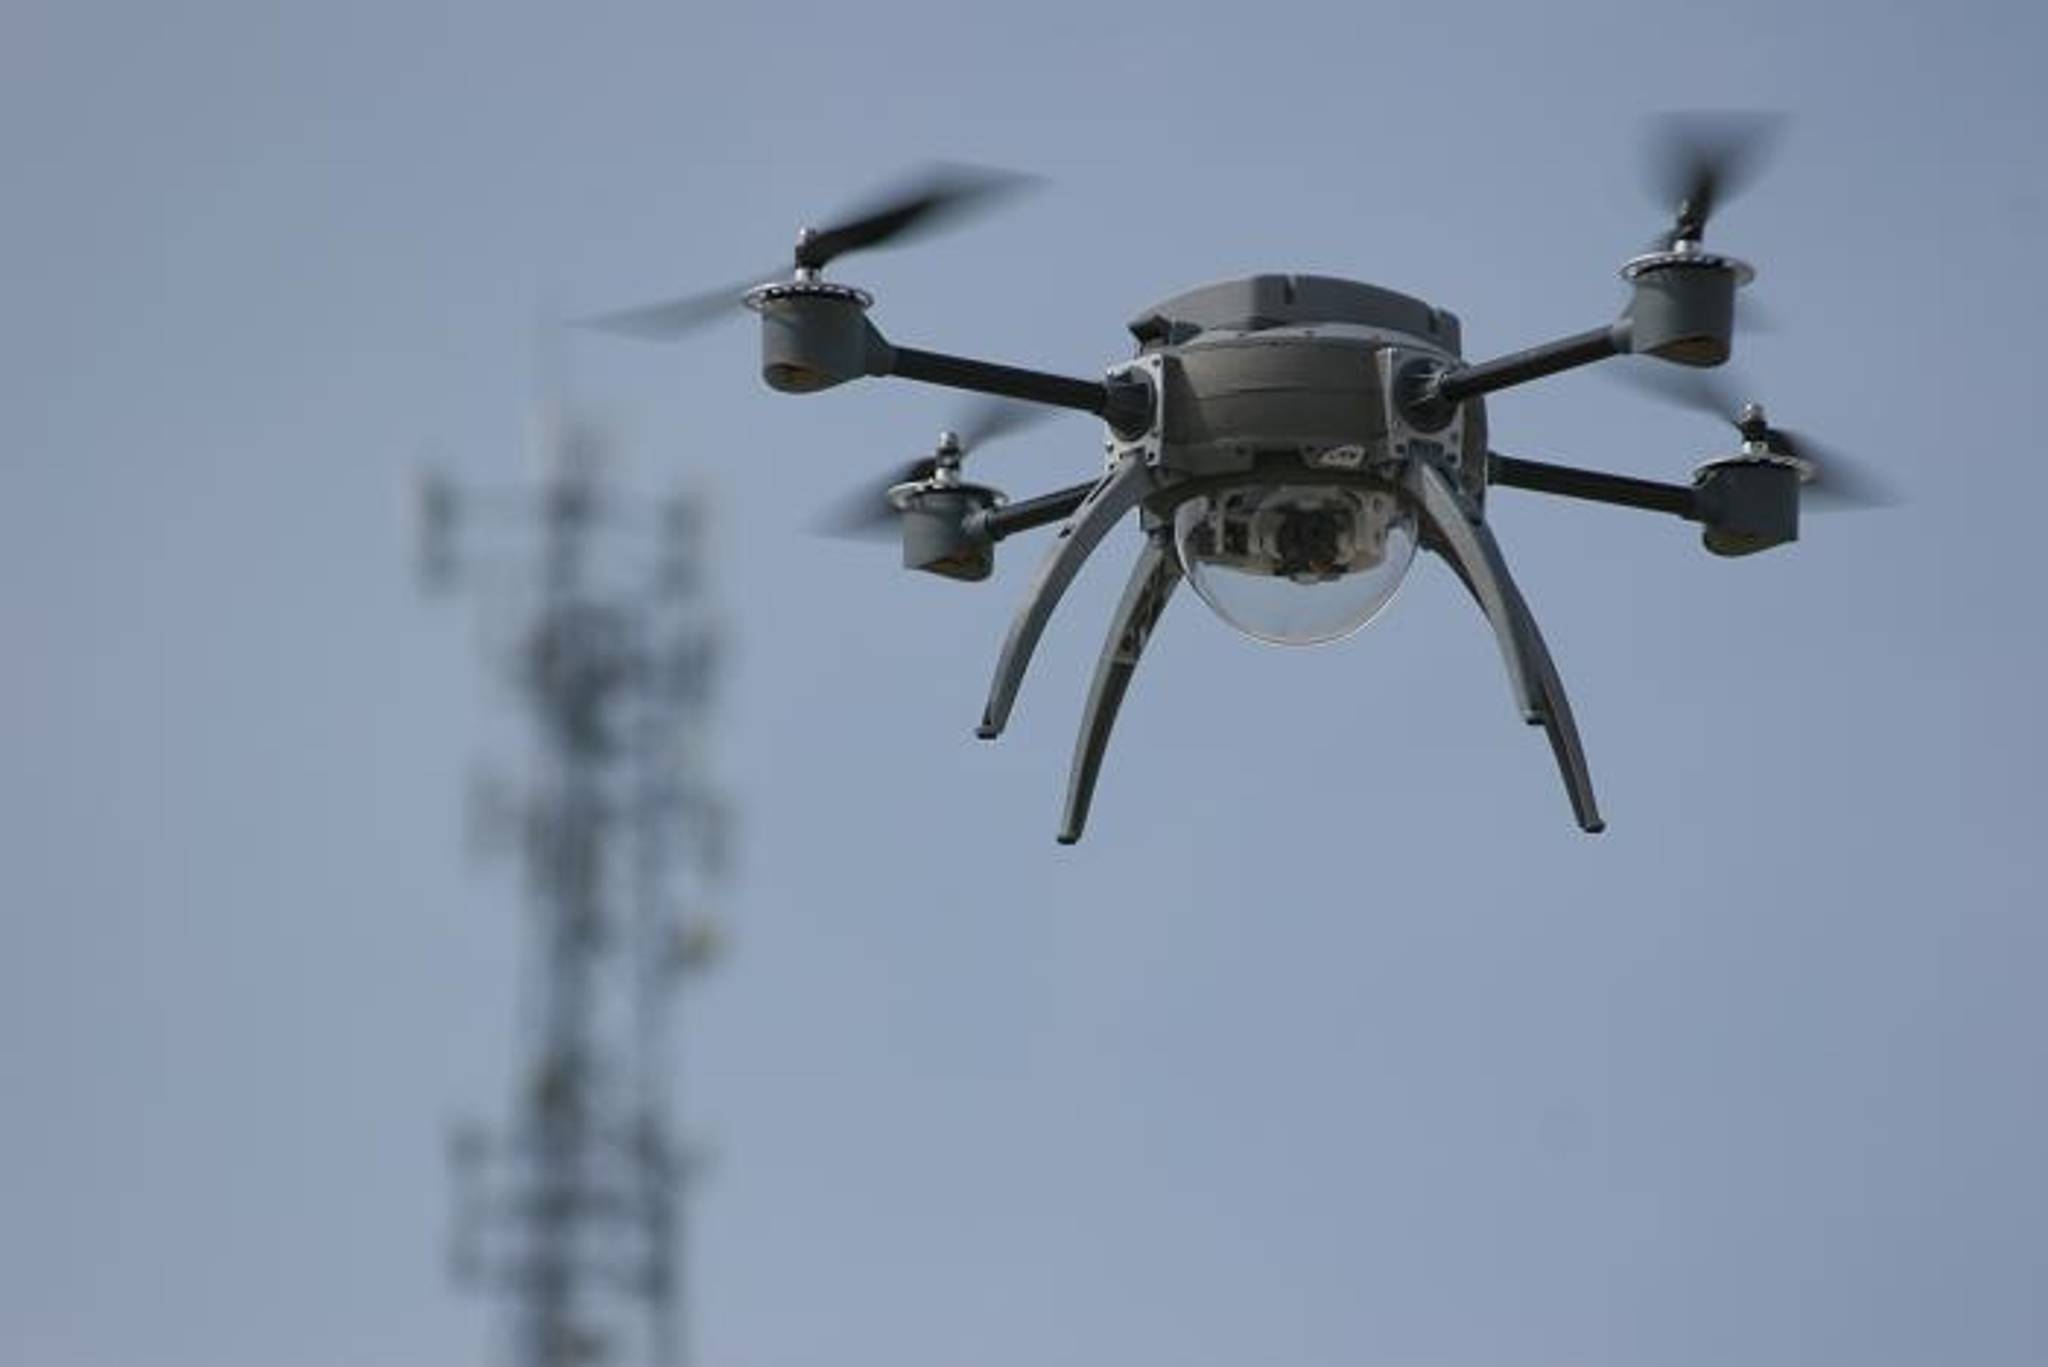 Delhi plans to use drones to police streets